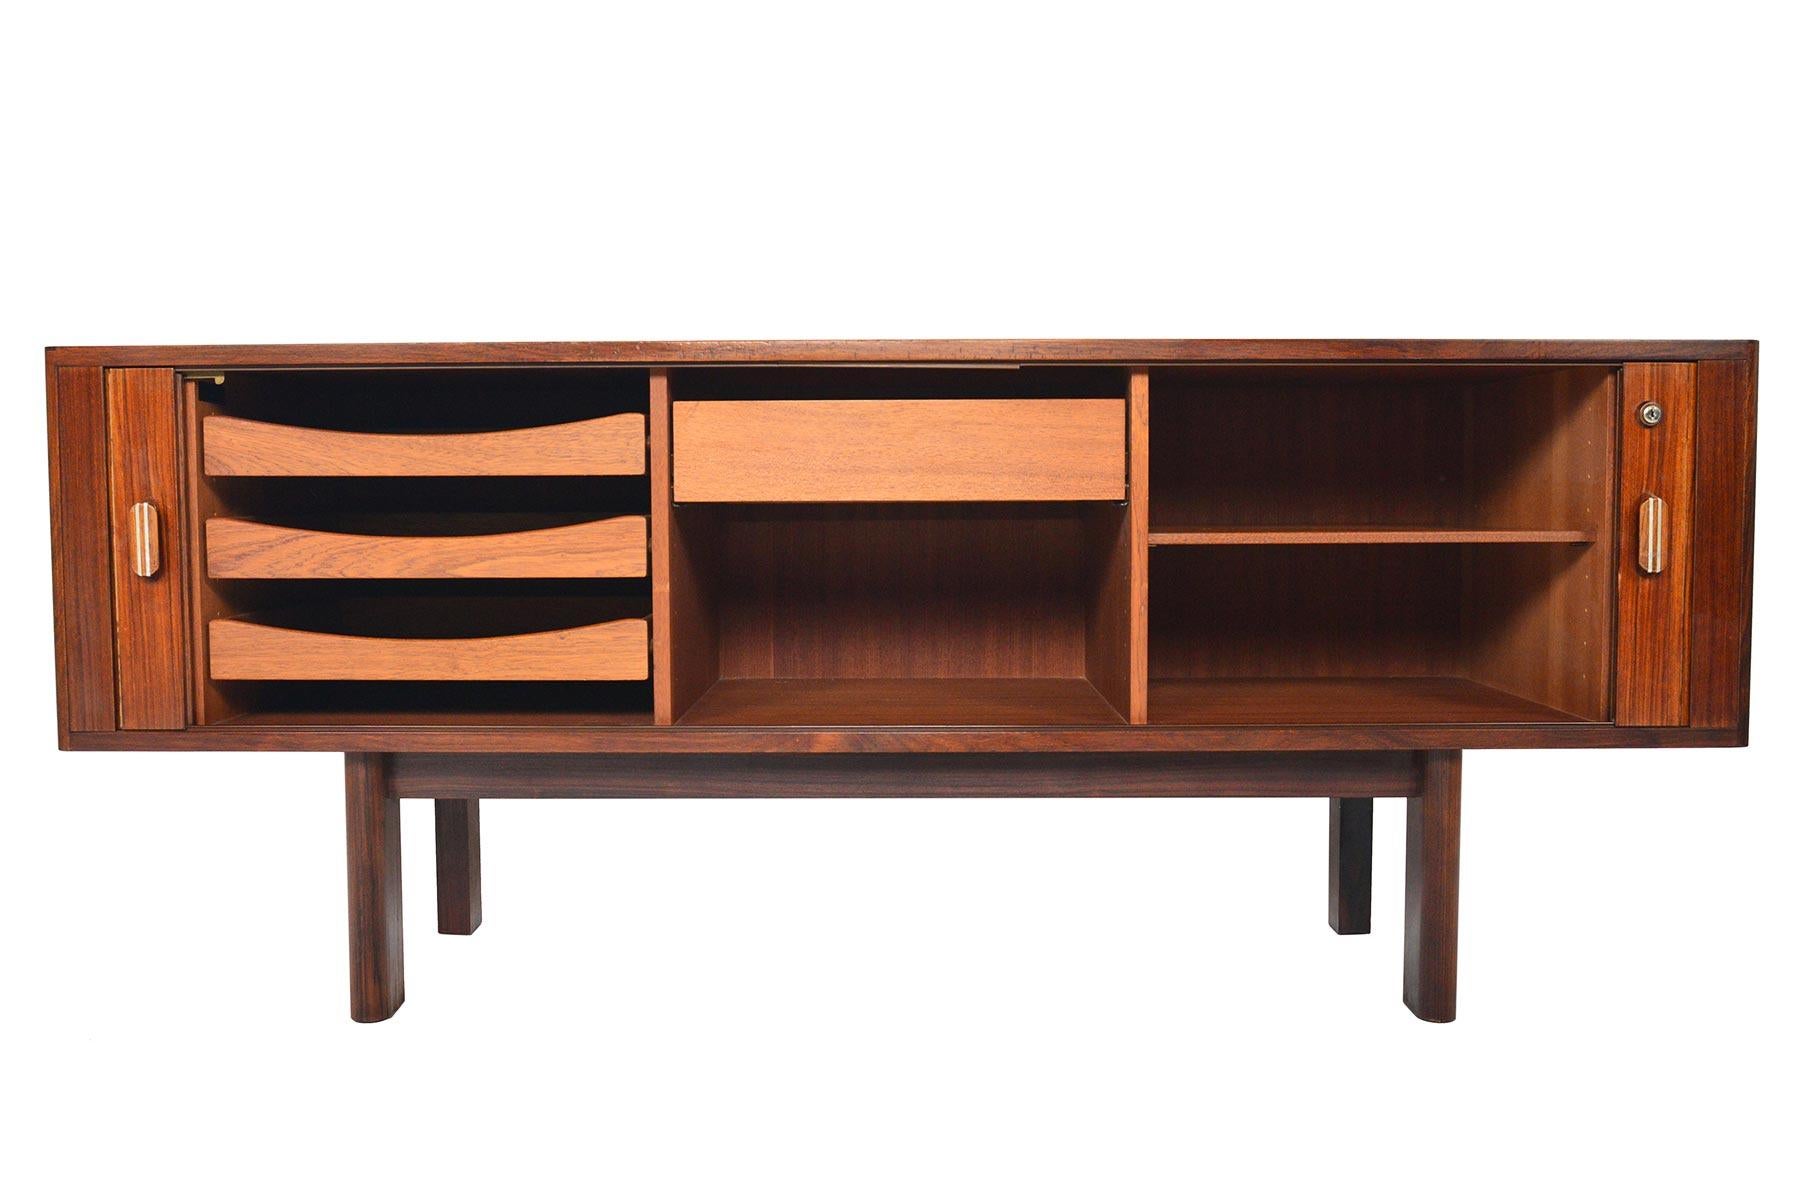 This Danish modern Brazilian rosewood tambour door credenza Model 237 was designed by Arne Vodder for Sibast and features a sleek profile and ample storage! This low design features soft corners and a sculpted base. The smooth running tambour doors